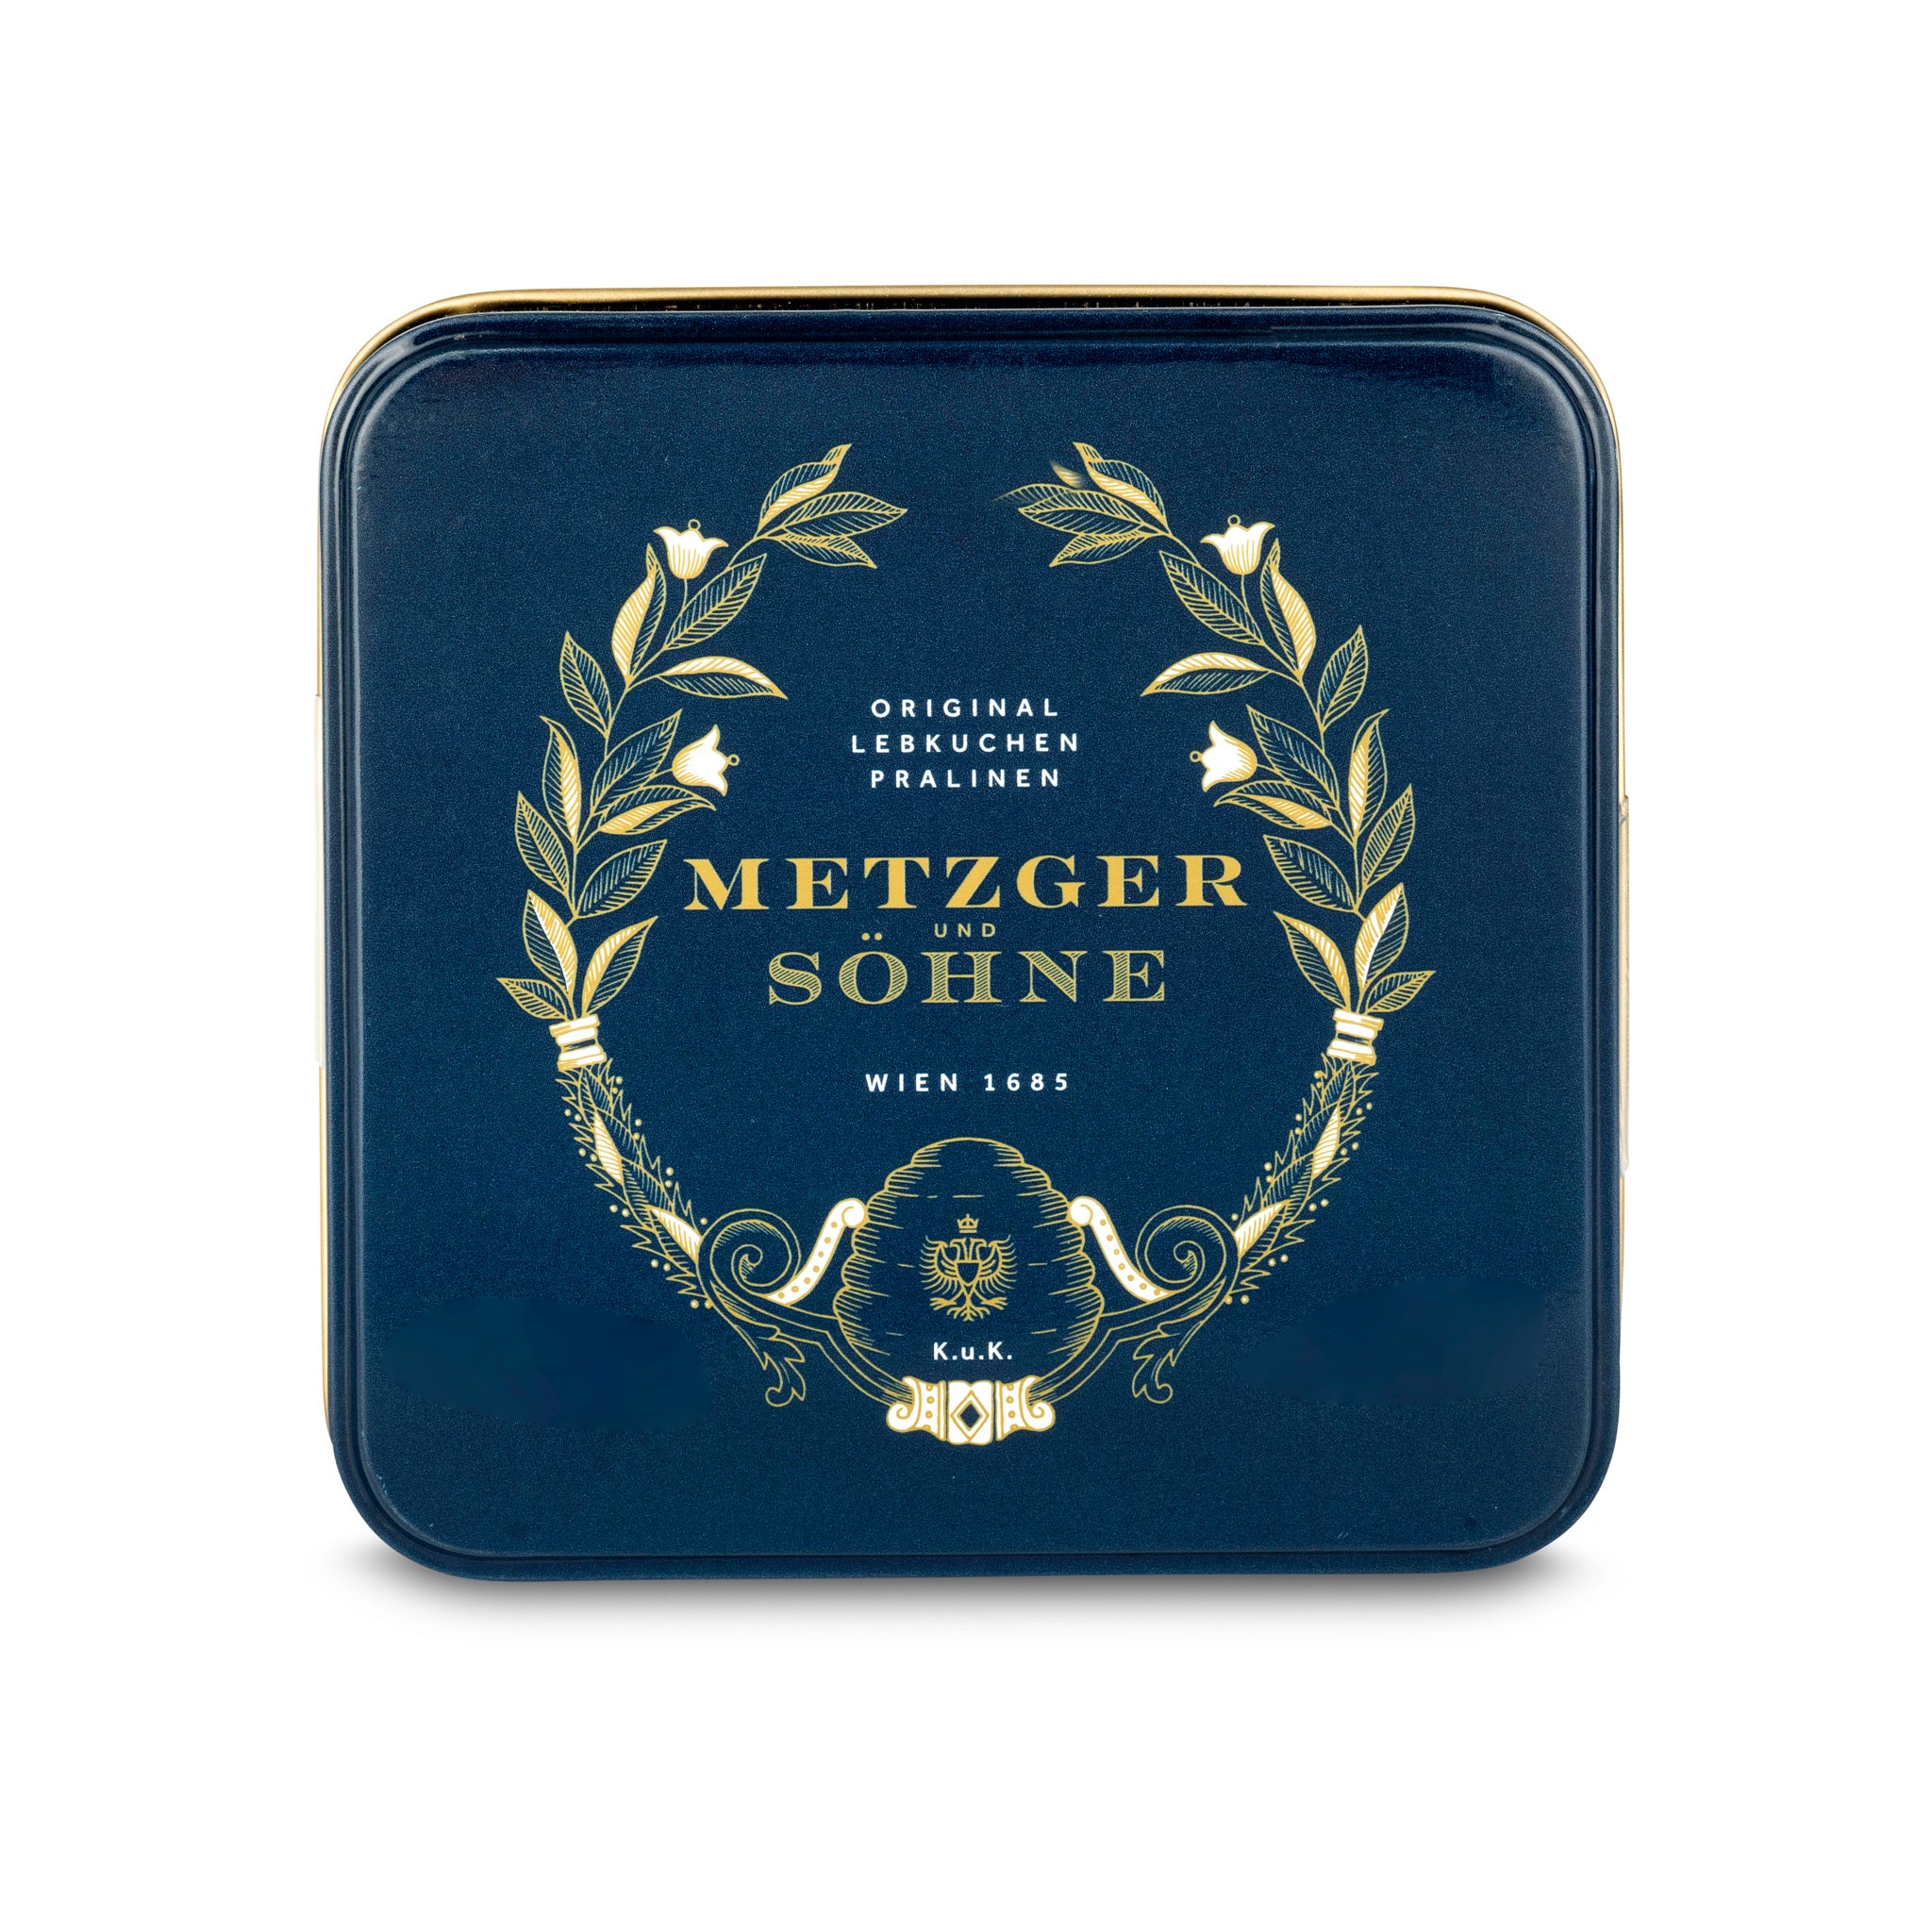 Metzger signature tin in navy blue filled with 9 different Lebkuchen 'honey cake' pralines filled with marzipan, fruits, nuts or jelly, encased in chocolate.